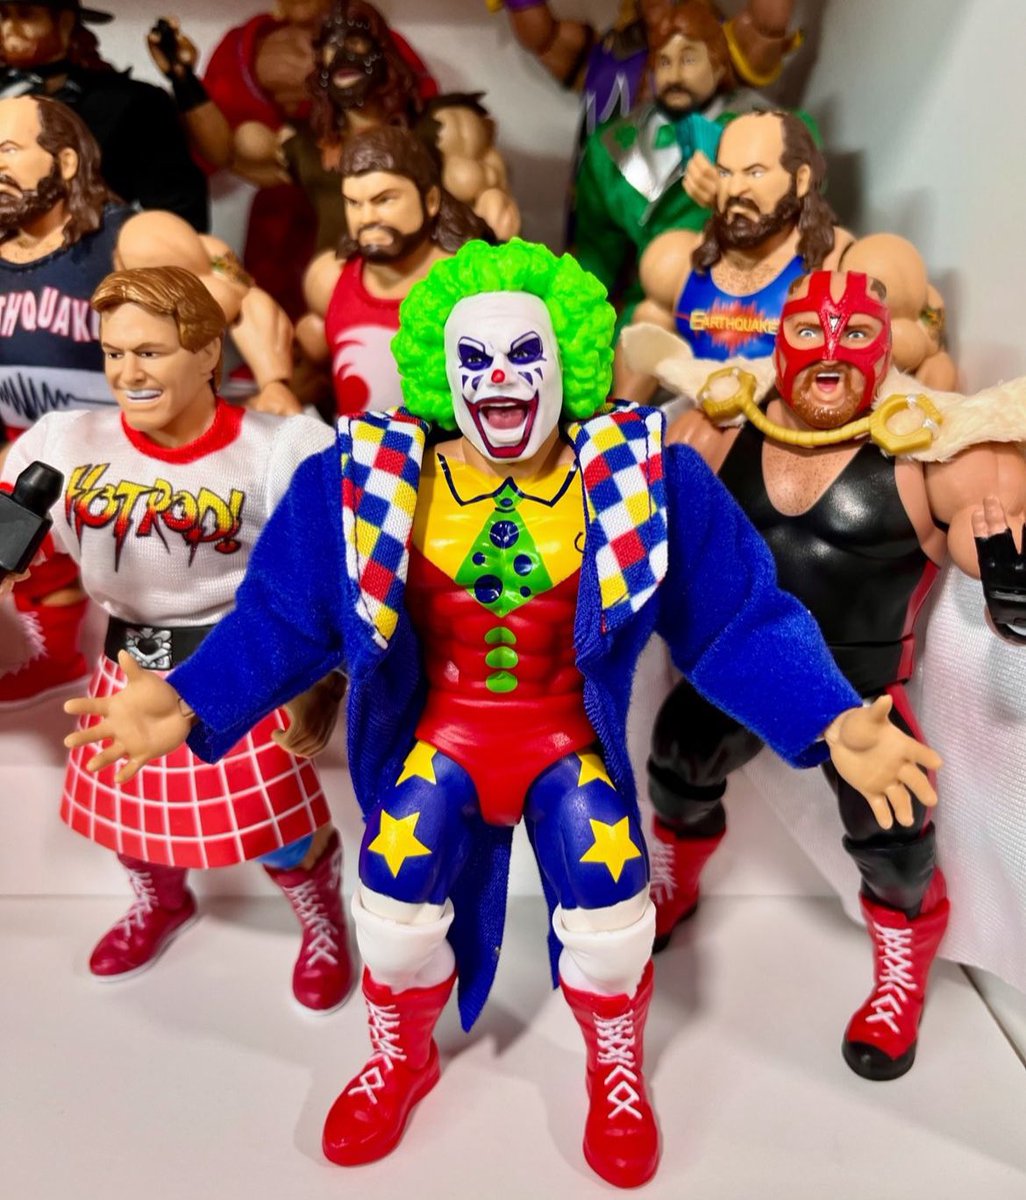 Fresh out the big top and straight to the Heel Cave thanks to @jmwhit55 Join Whatnot @ WHATHEEL.com & get $15 to use! #figheel #casefreshpod #actionfigures #toycommunity #toycollector #wrestlingfigures #wwe #aew #njpw #tna